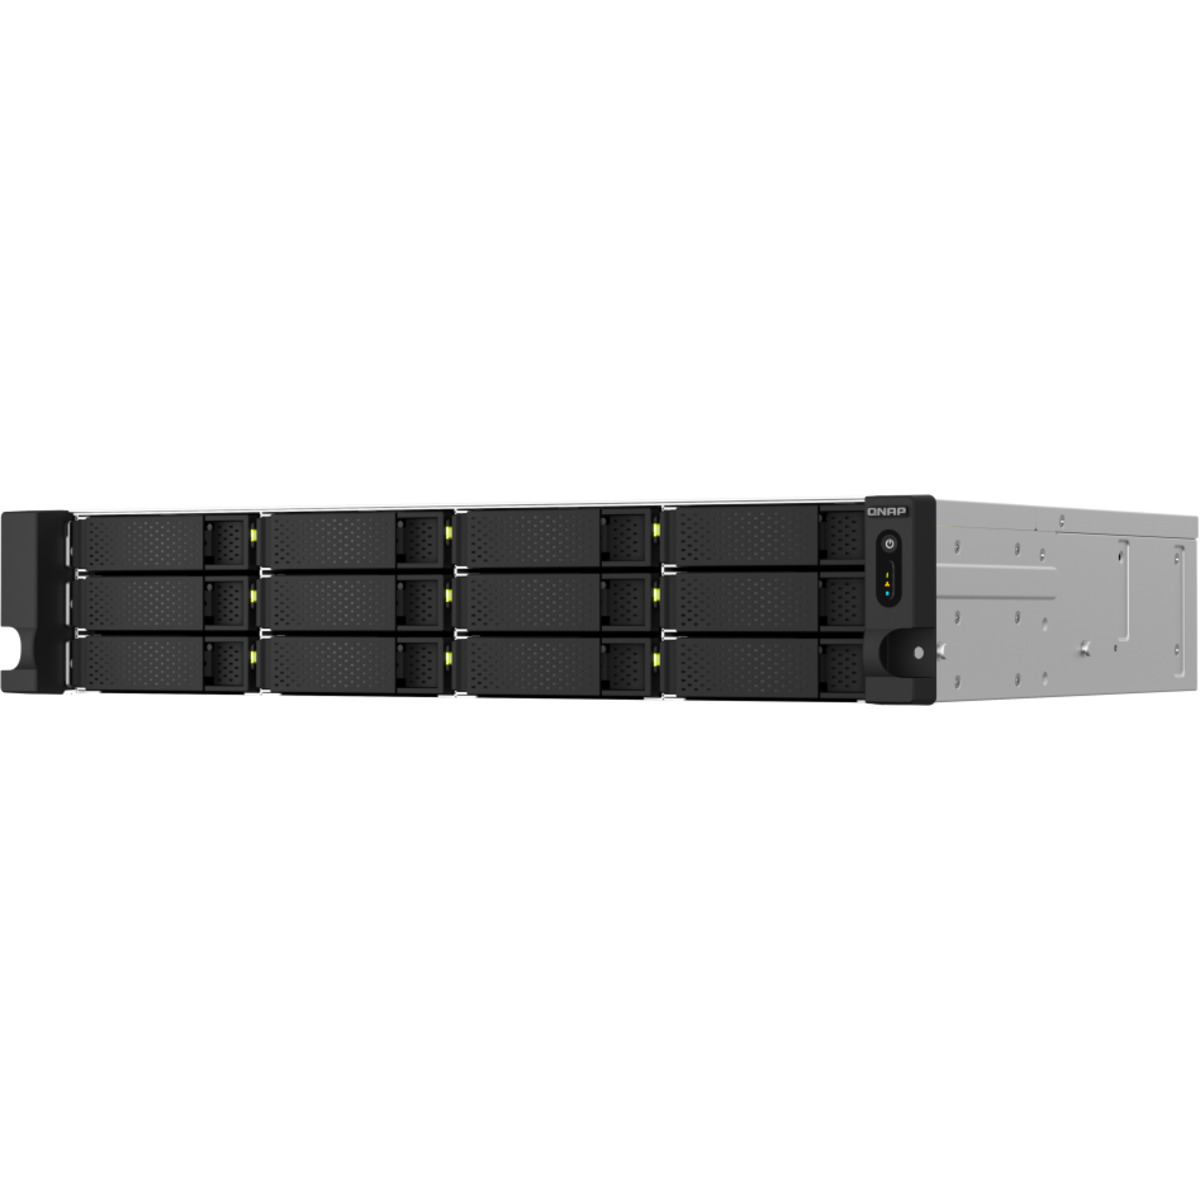 QNAP TS-1264U-RP RackMount 12-Bay Multimedia / Power User / Business NAS - Network Attached Storage Device Burn-In Tested Configurations TS-1264U-RP